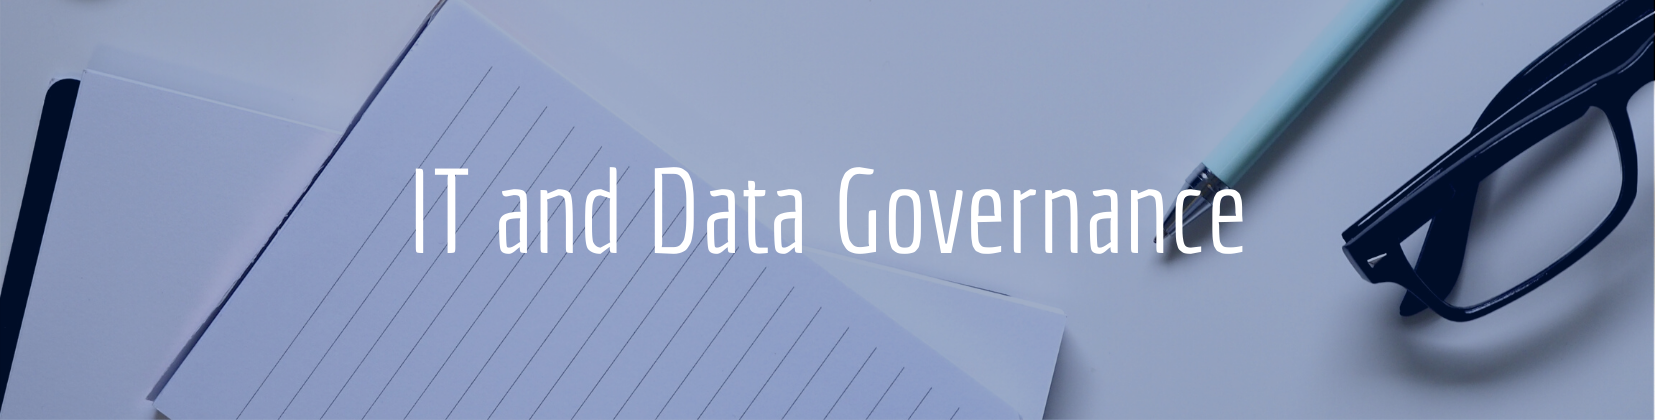 It and Data Governance Banner